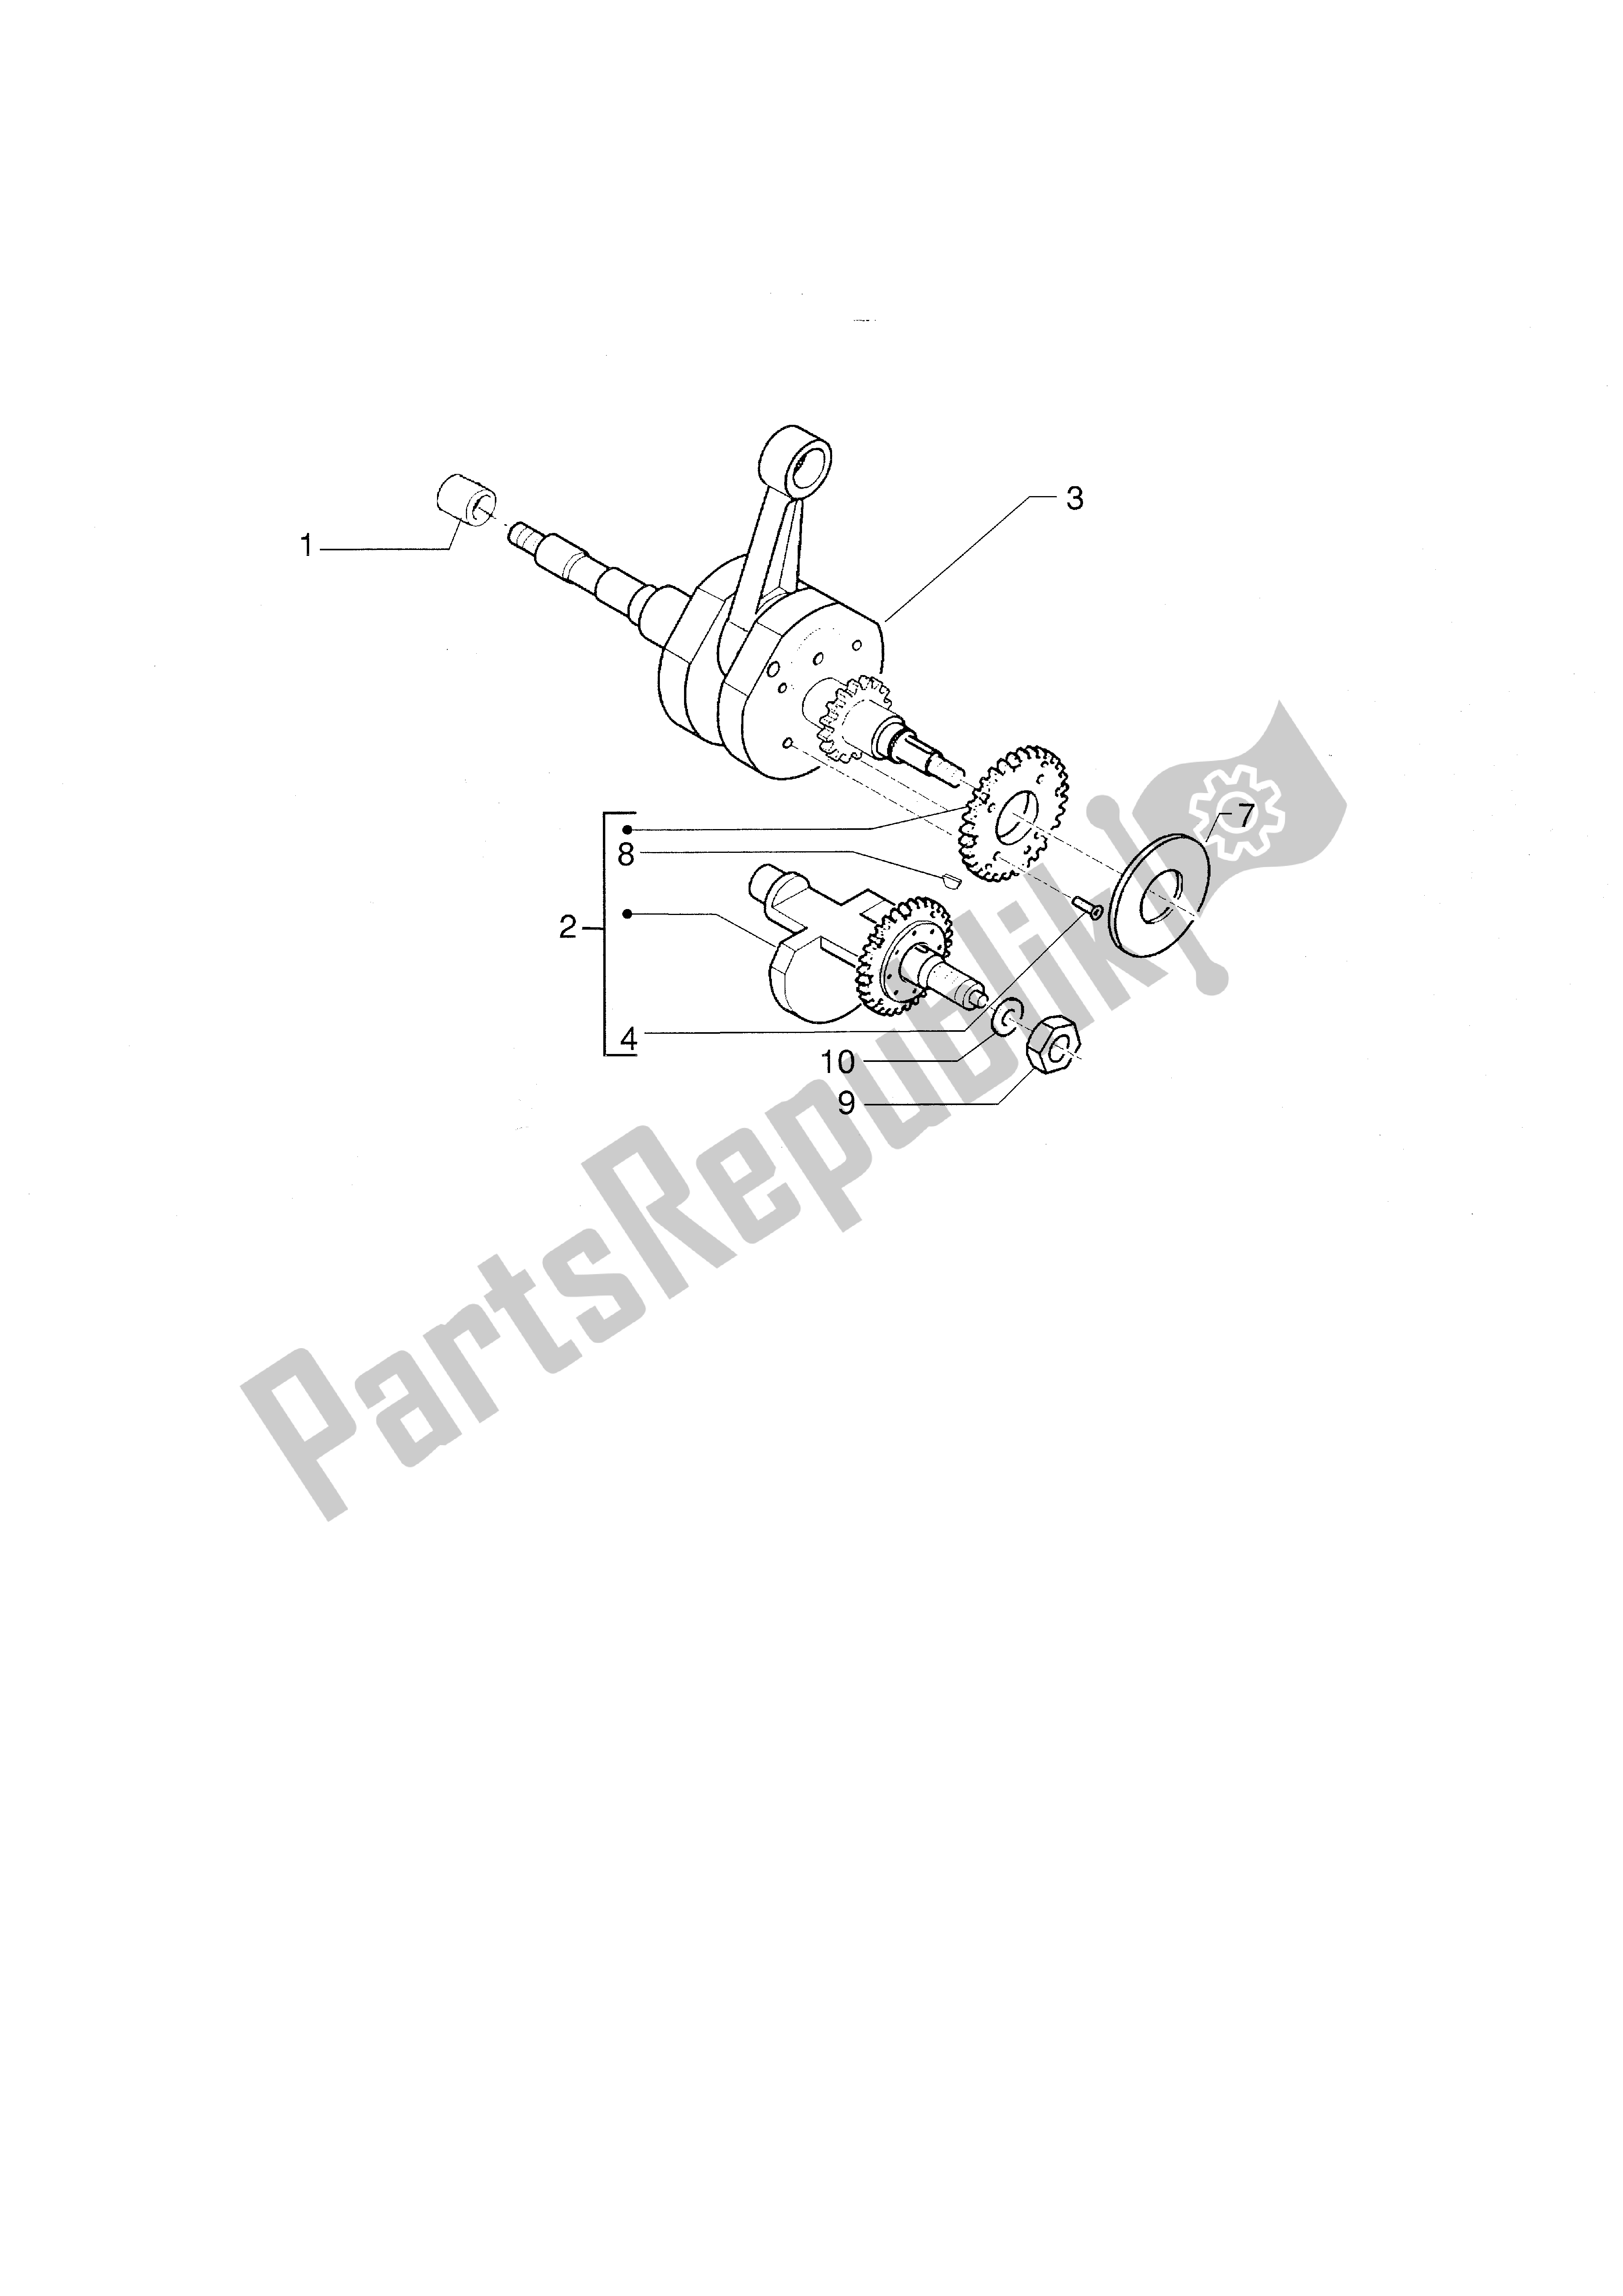 All parts for the Crankshaft of the Piaggio X9 500 2001 - 2002